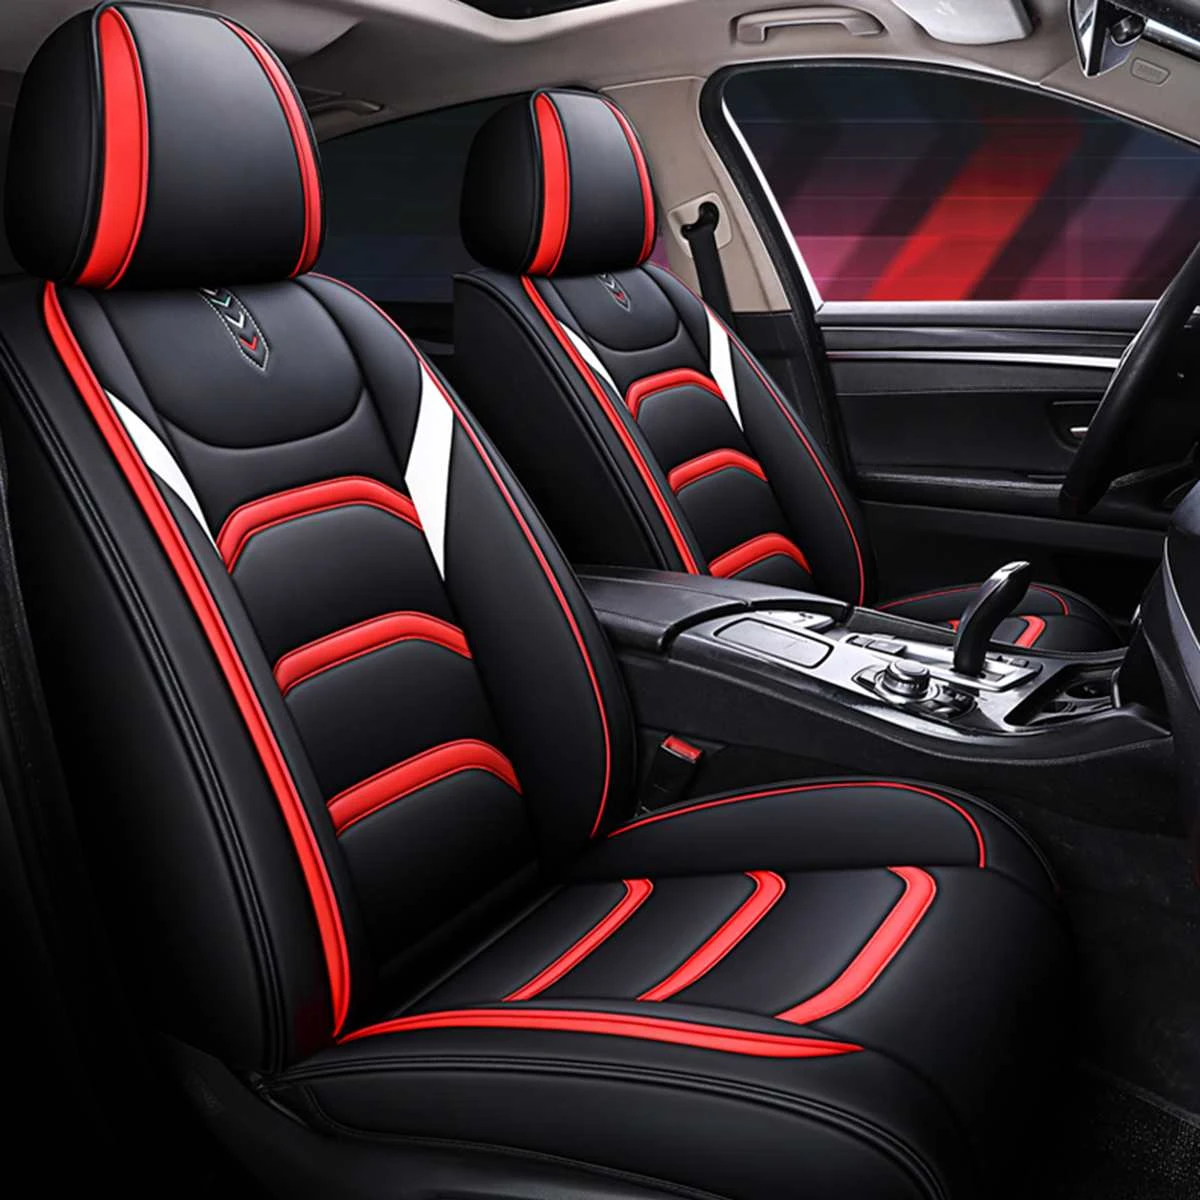 Universal Quality Deluxe Black Red PU Leather Front Car Seat Cover Padded 